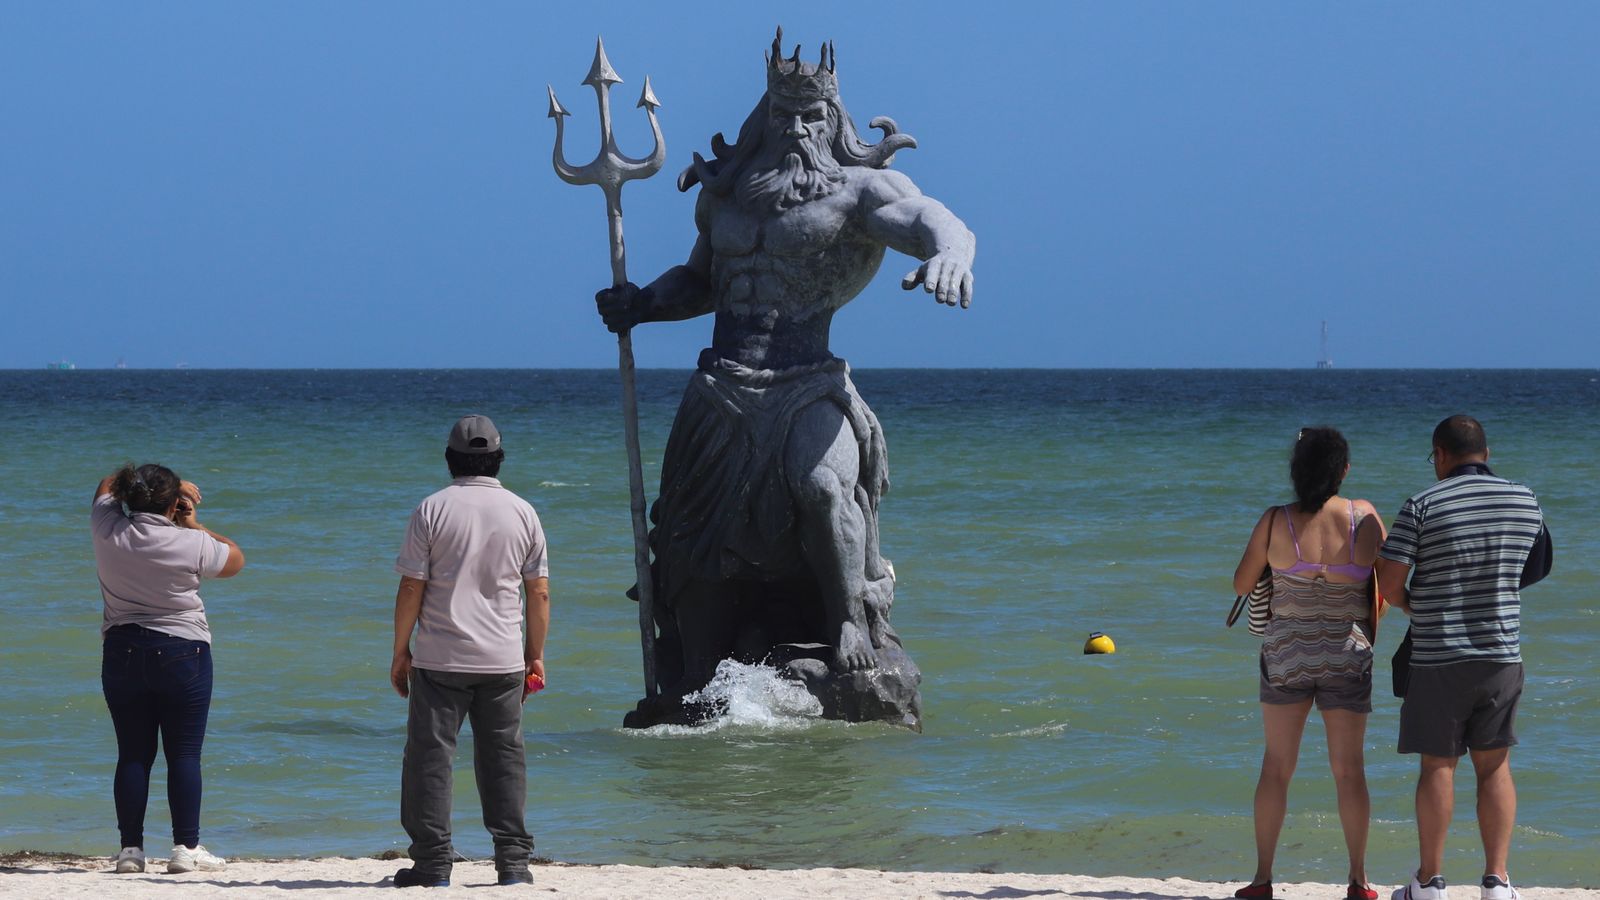 Mexico ‘closes’ statue of Greek god Poseidon because it offends indigenous groups | World News